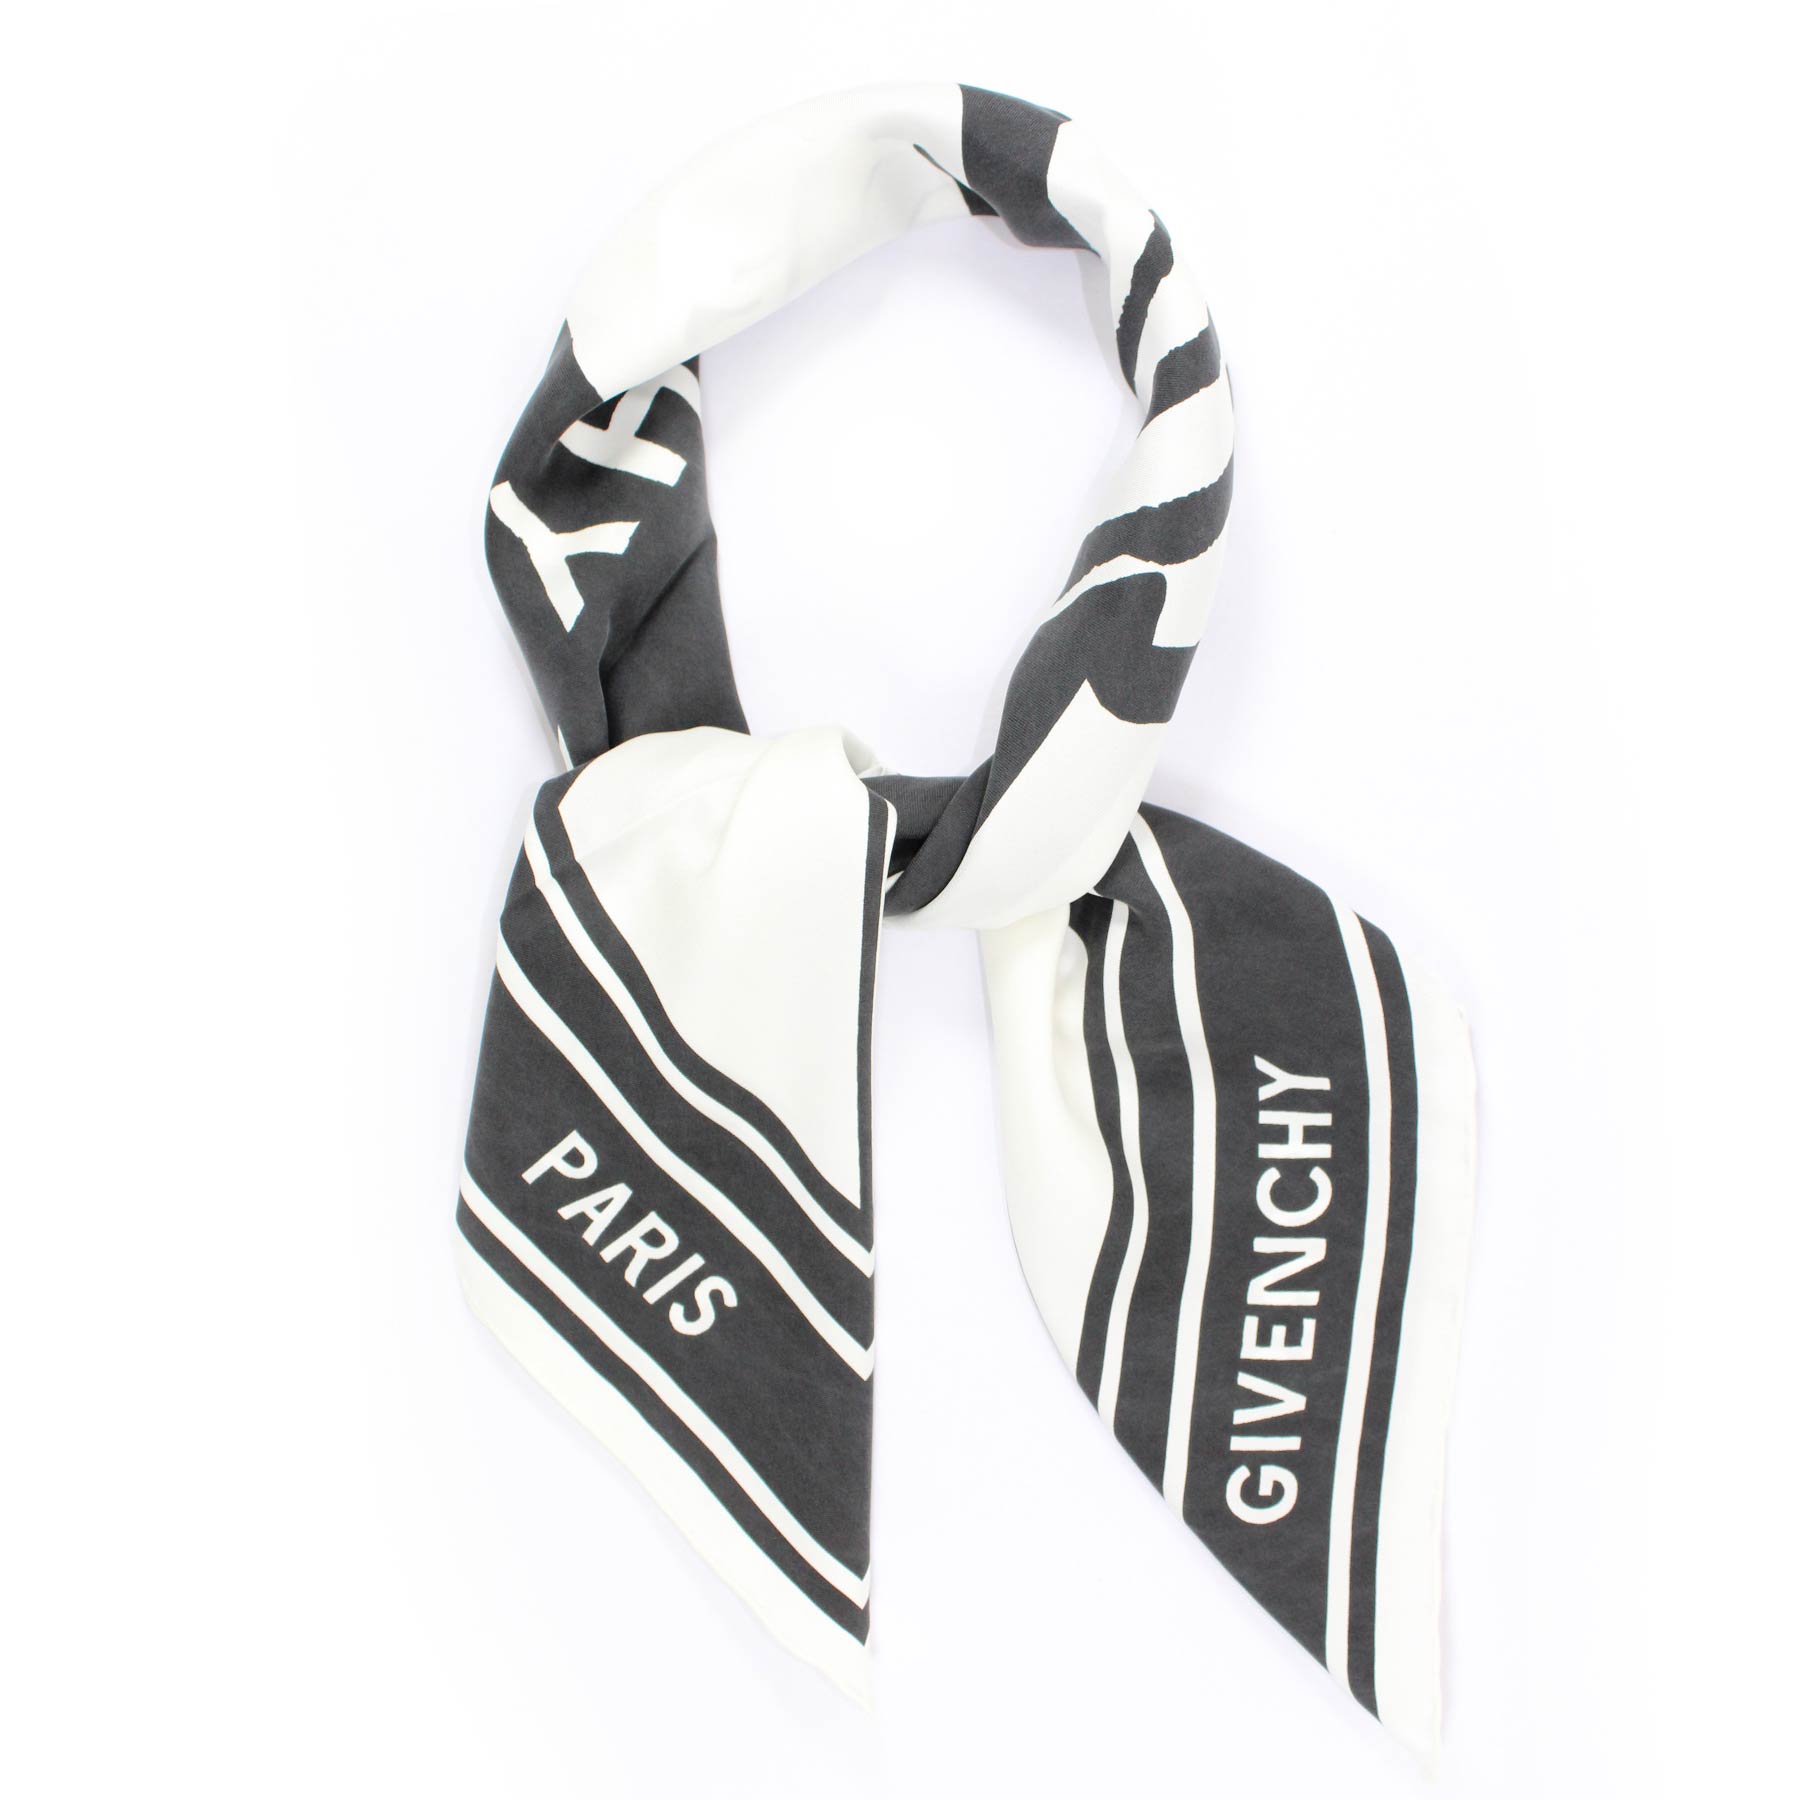 black and white long scarf